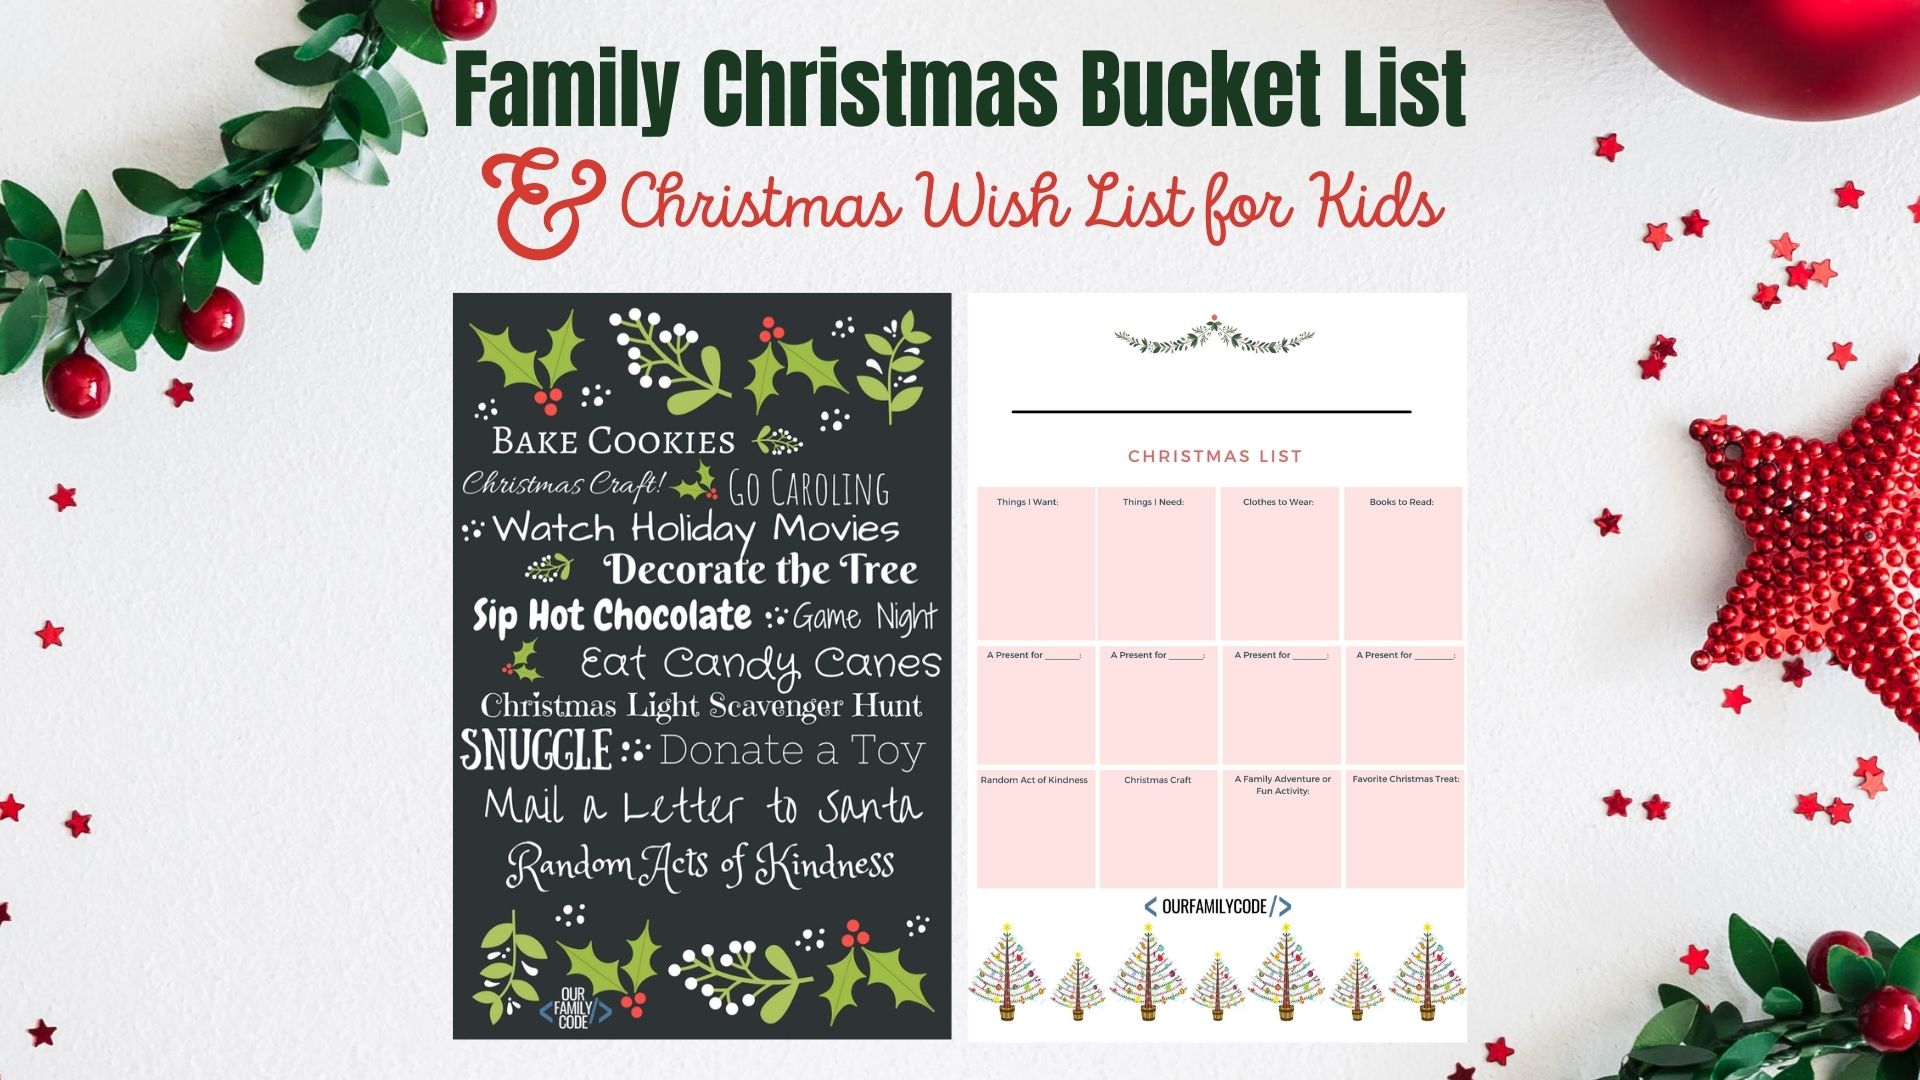 A picture of a family christmas bucket list and a christmas wish list for kids printable.